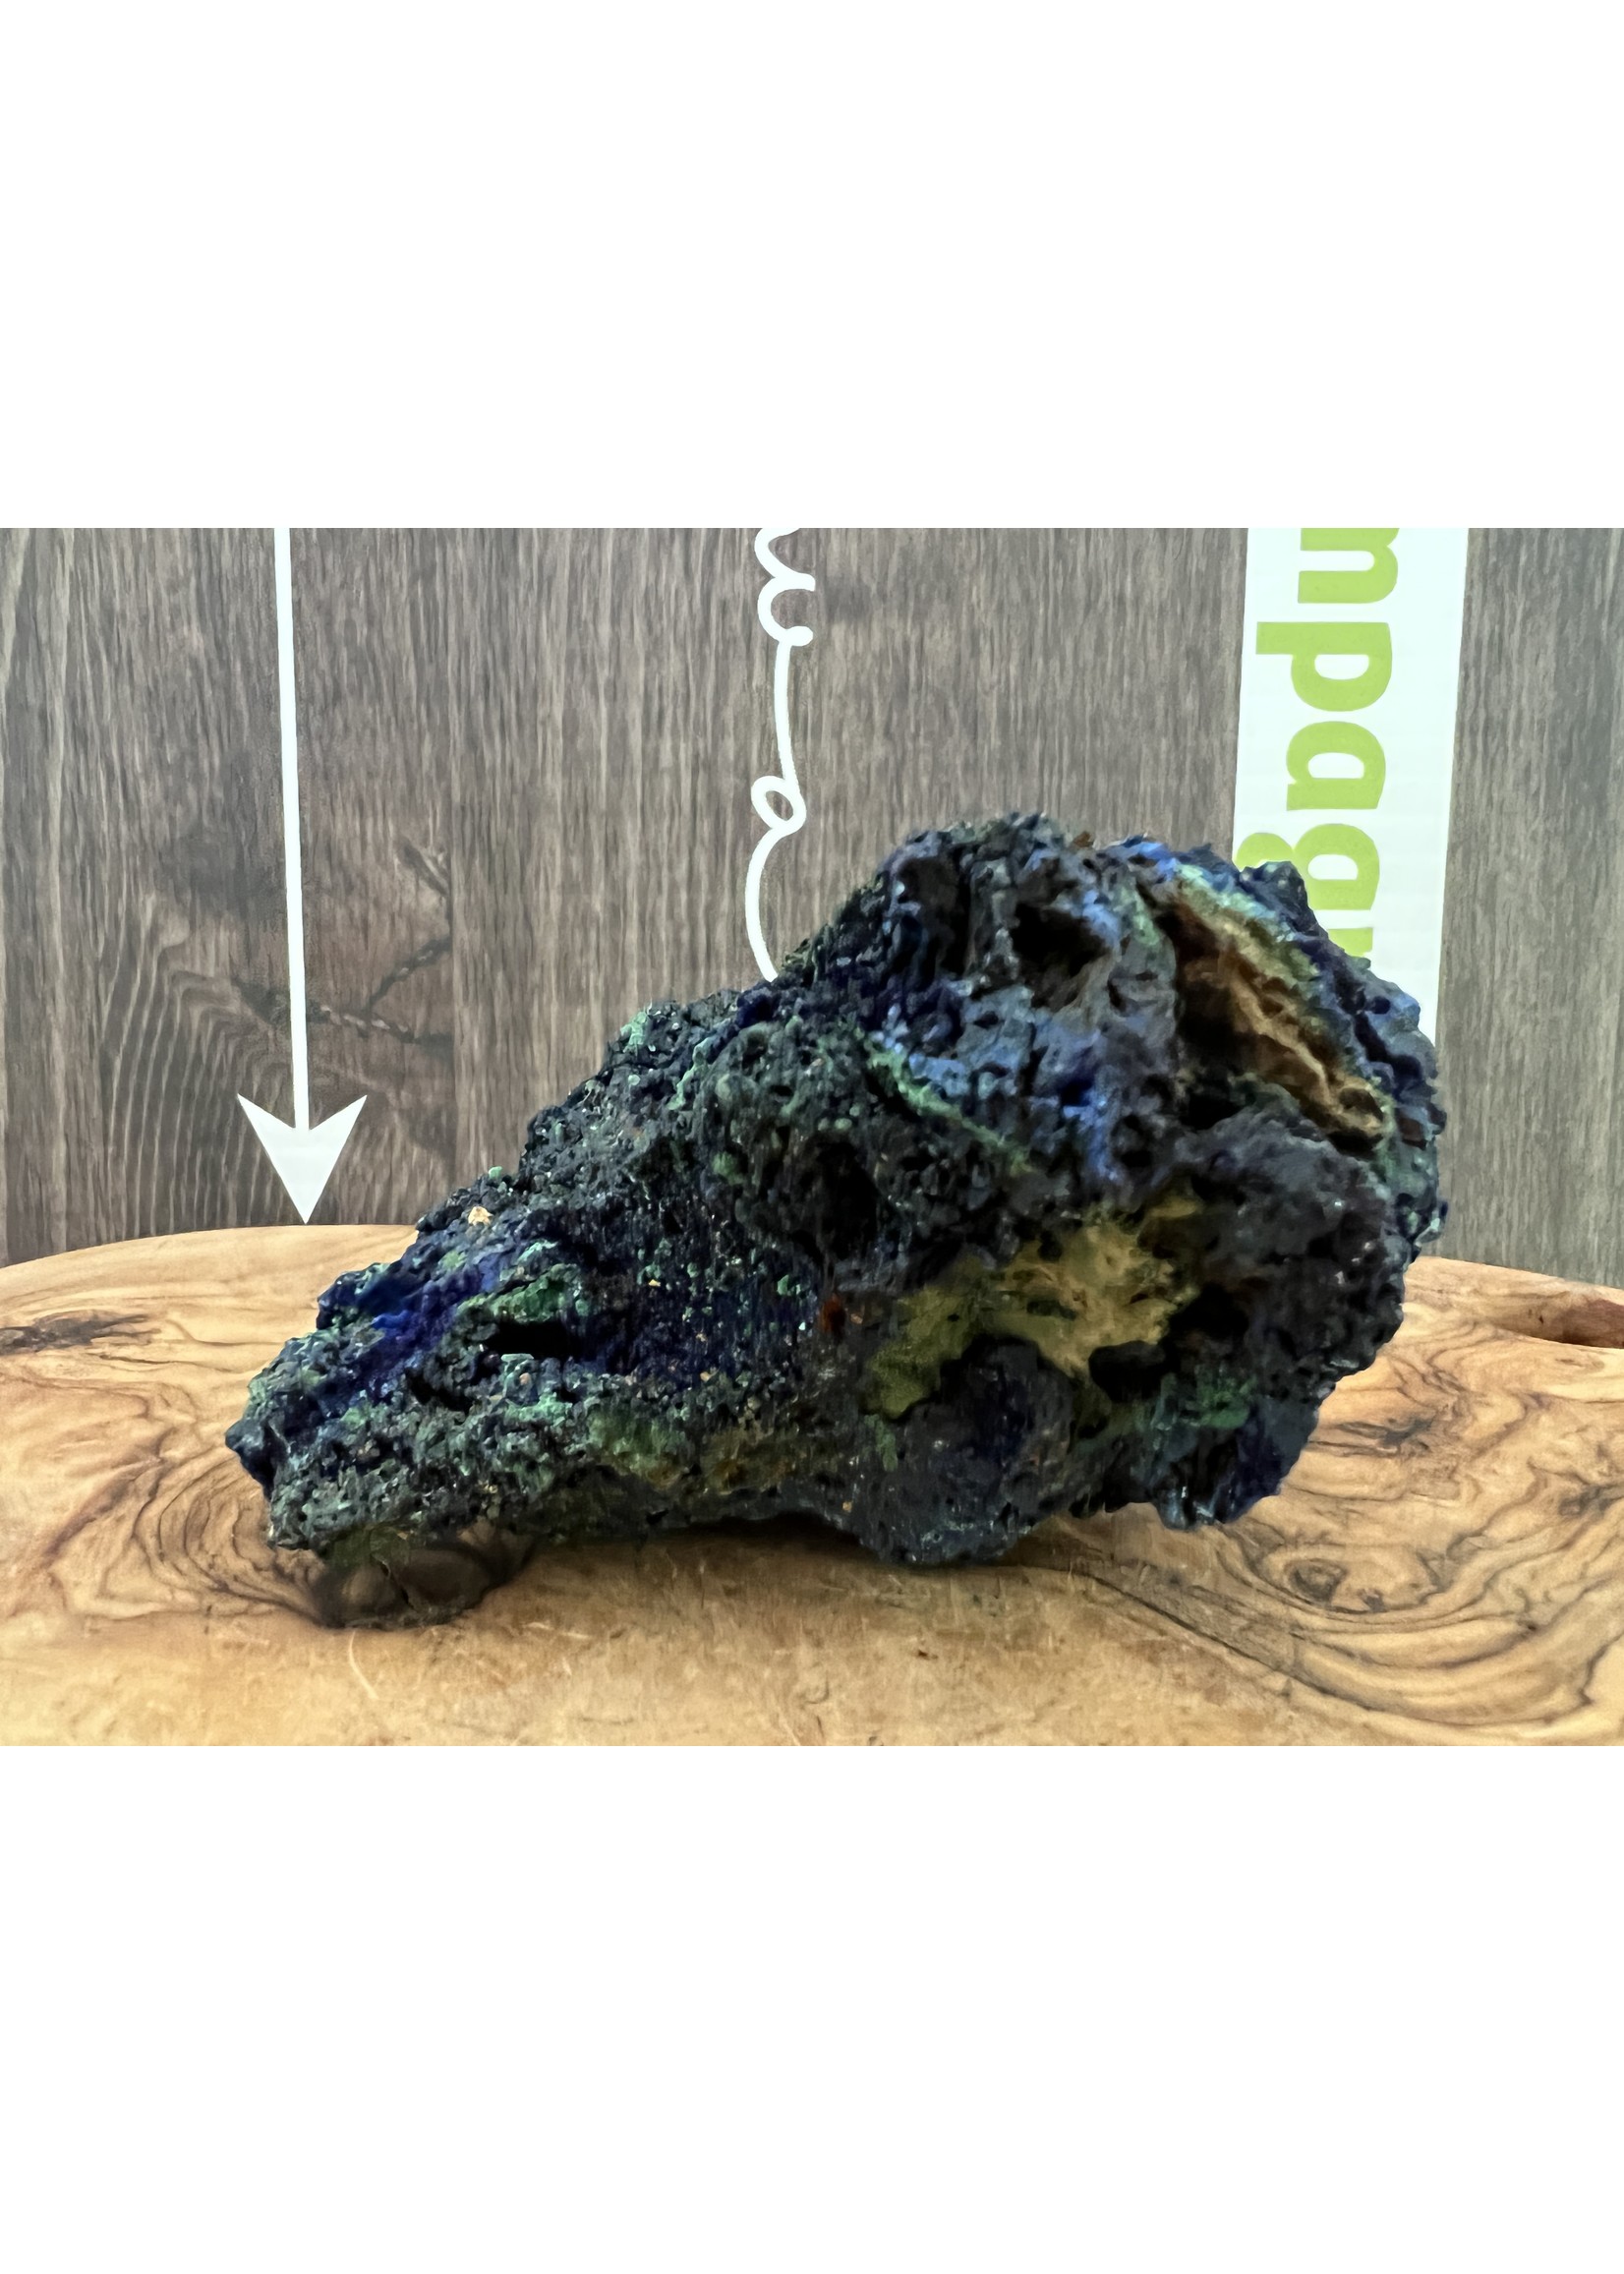 large azurite malachite rough, stimulates creativity, helps with concentration, great stone for astral travel